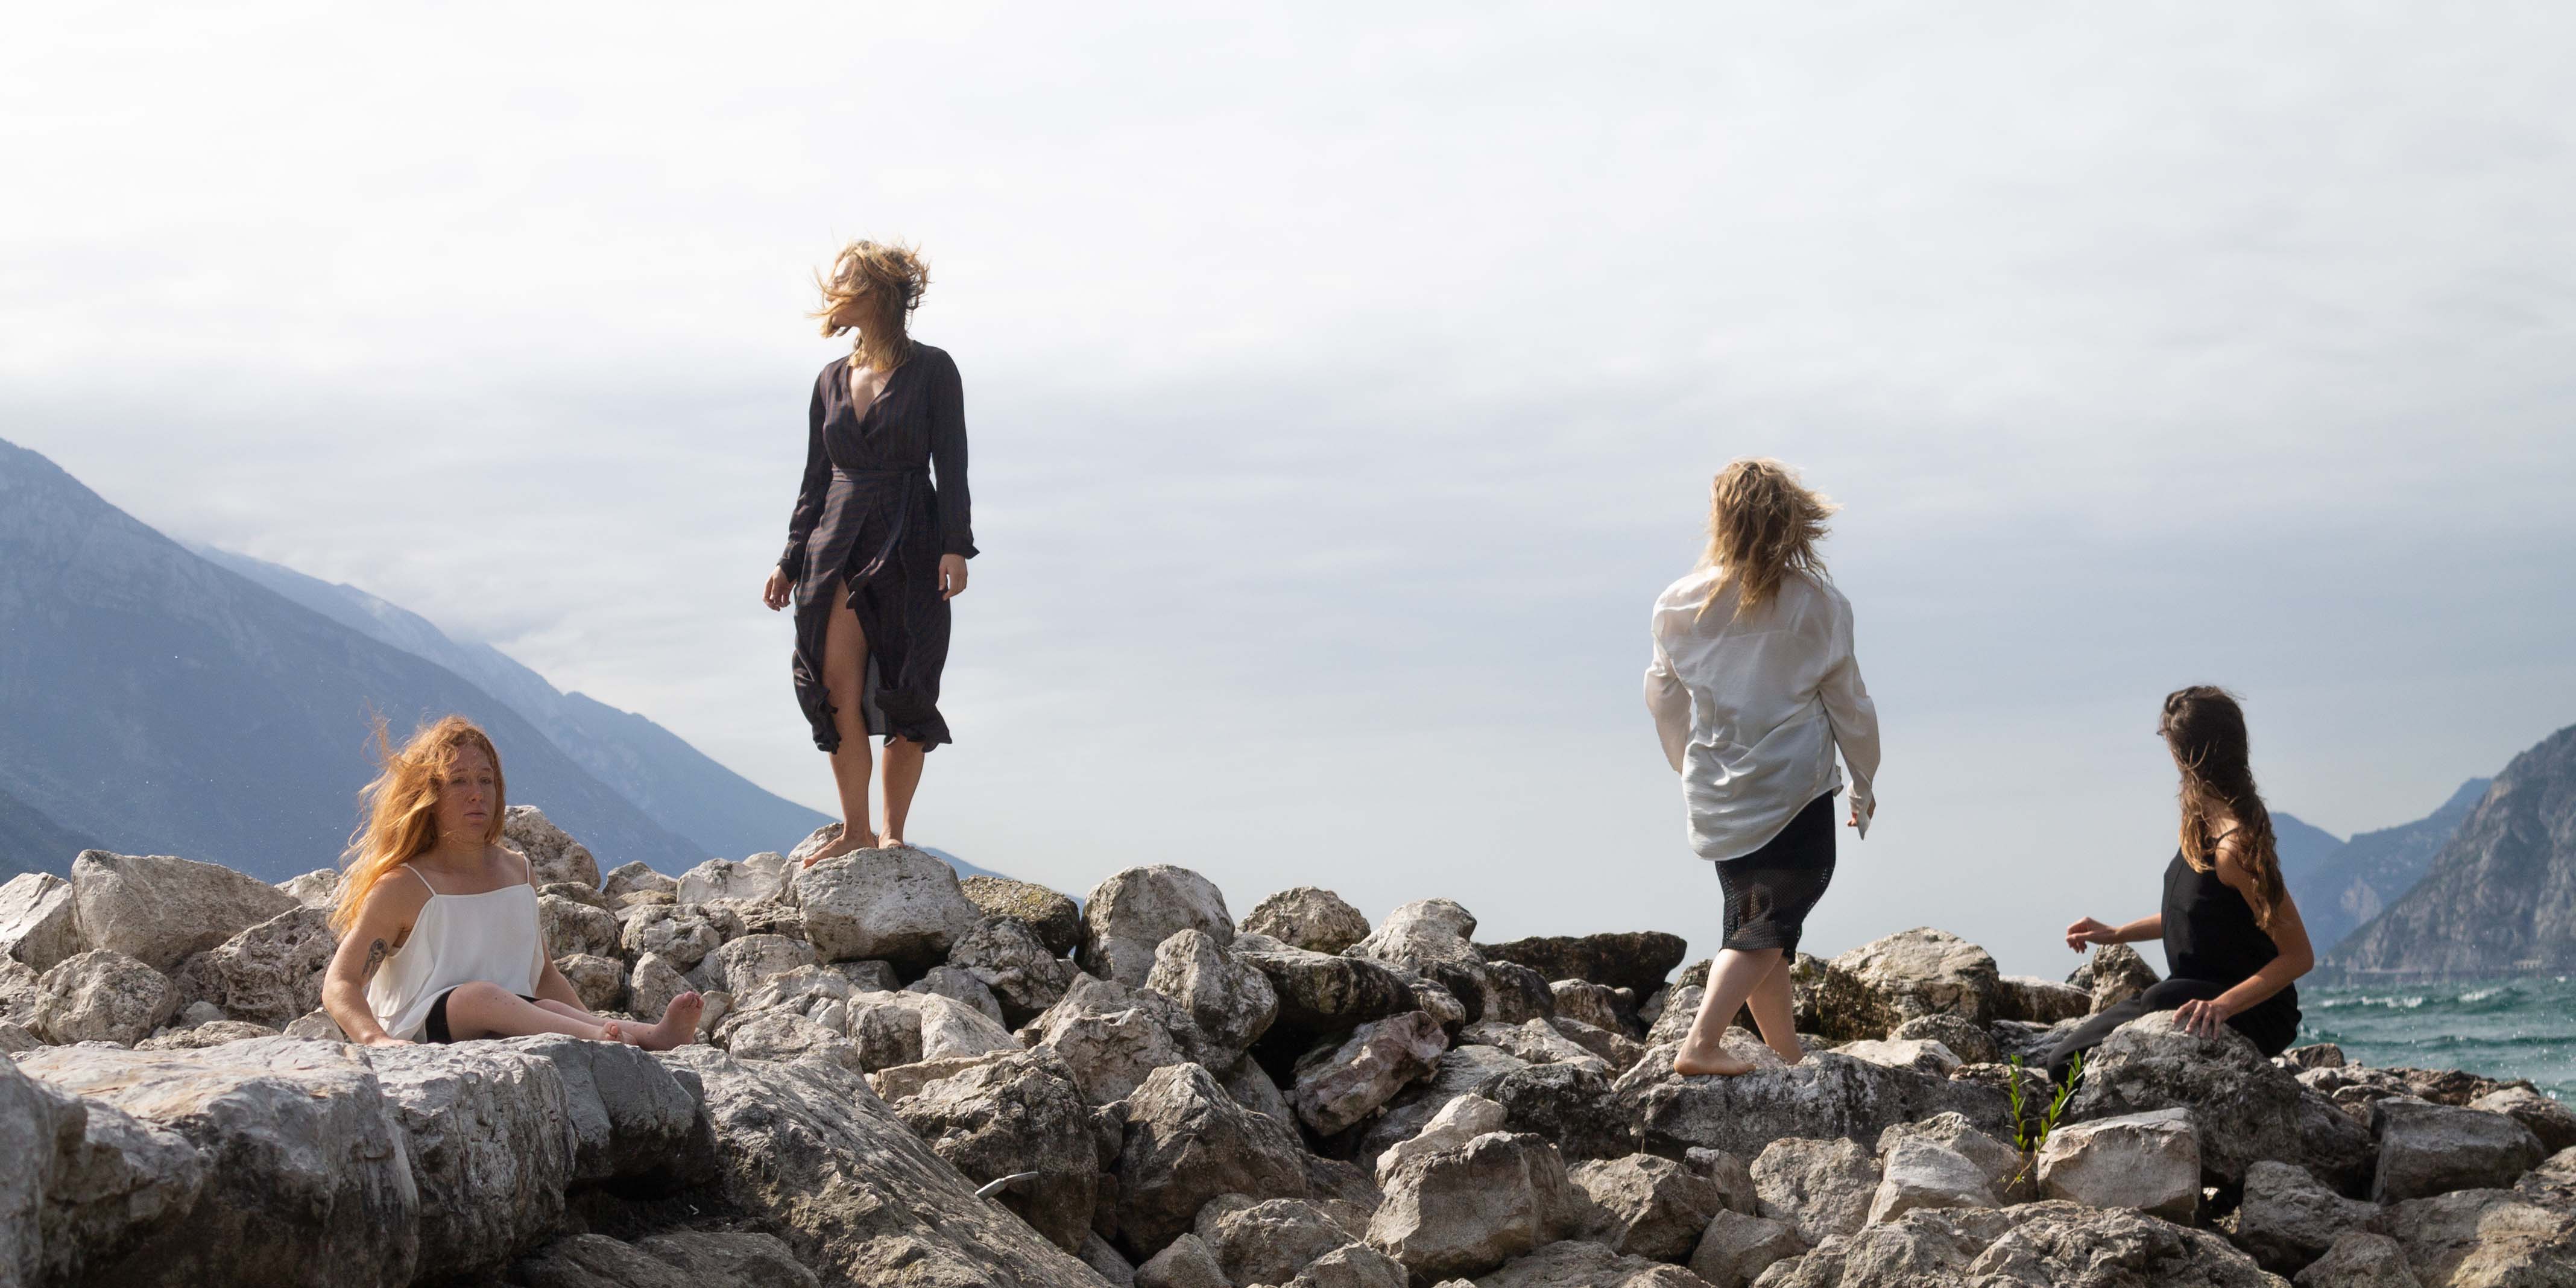 Image for the performance Moby Dick. The image depicts four persons standing and sitting on a pile of rocks, with water and the mountains in the background. The persons are all looking in different directions while the wind pull at their clothes and hair. Photo: Federico Gazza